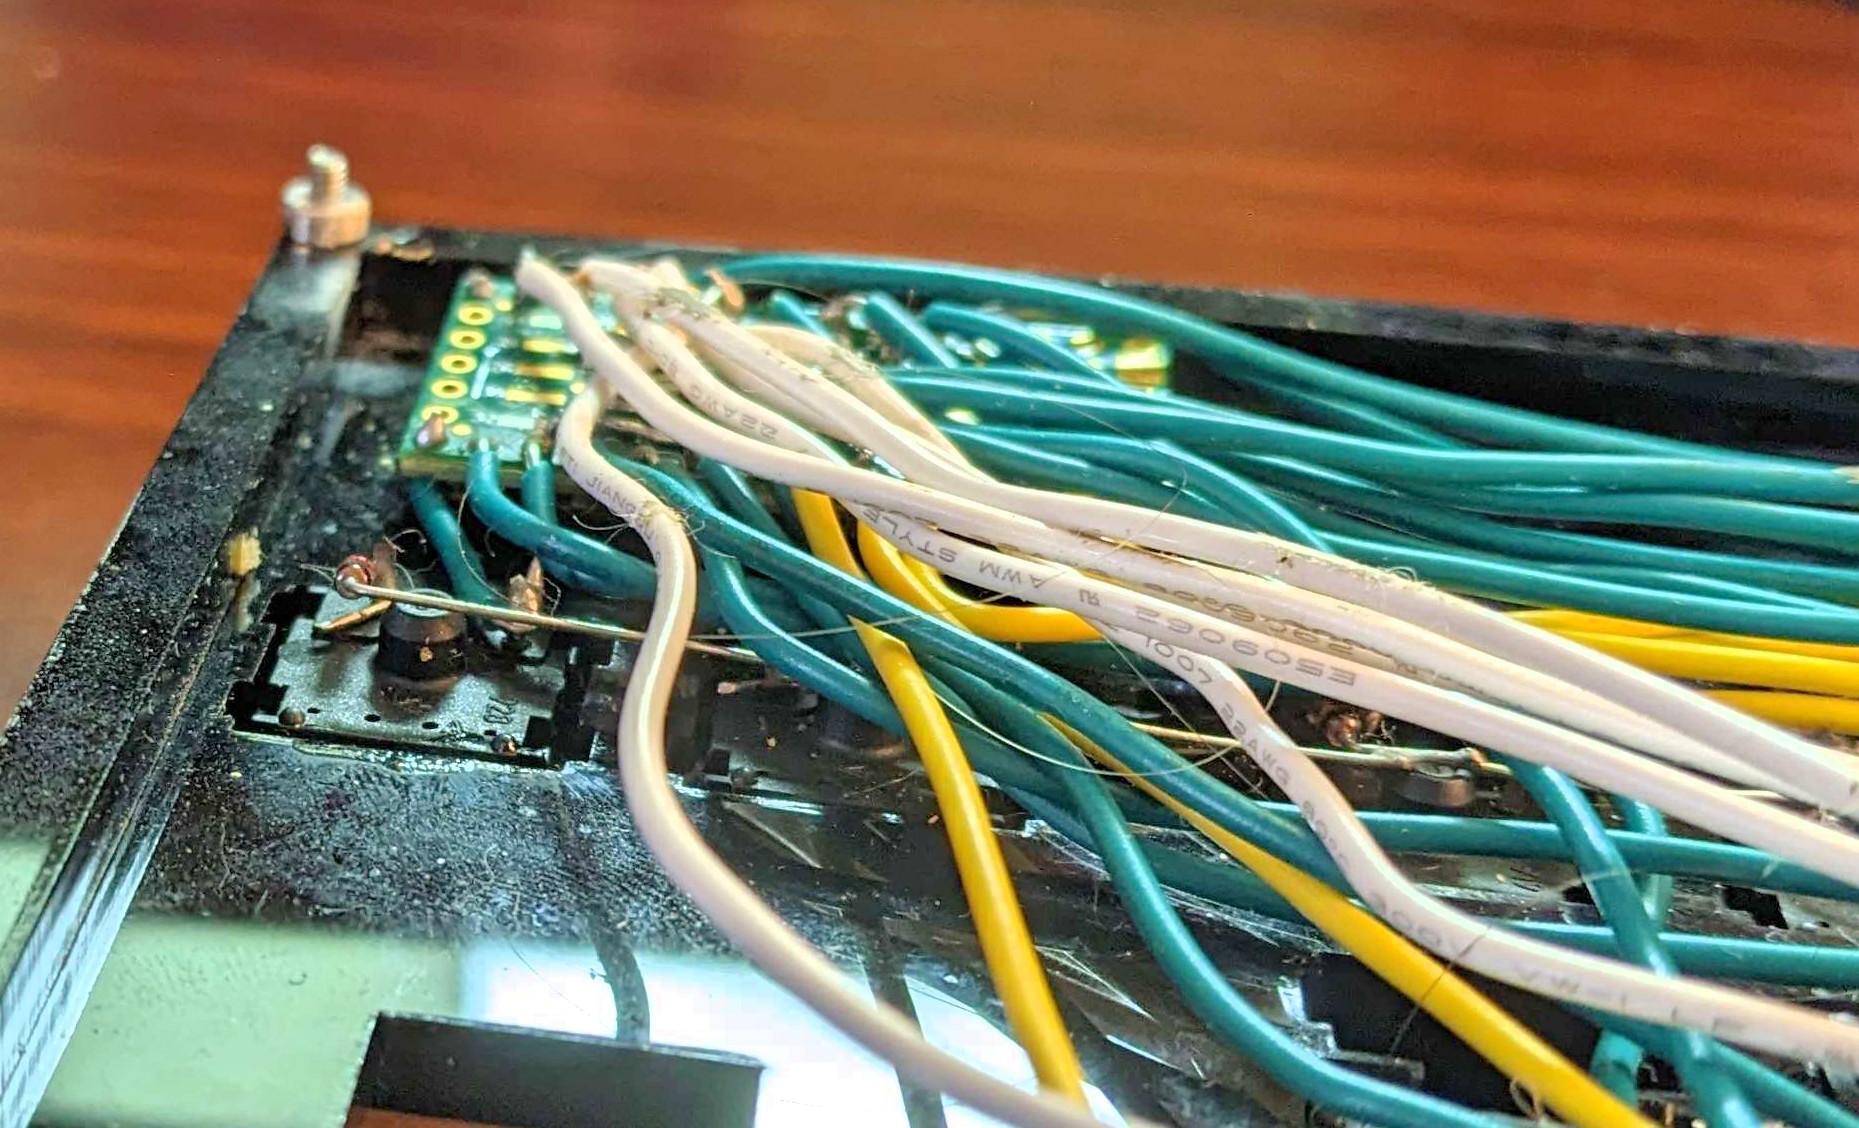 A photograph showing a mess of wires on the underside of a keyboard. The wires have picked up quite a lot of hair and lint and are messily attached to the terminals of a small control board, barely visible through them.